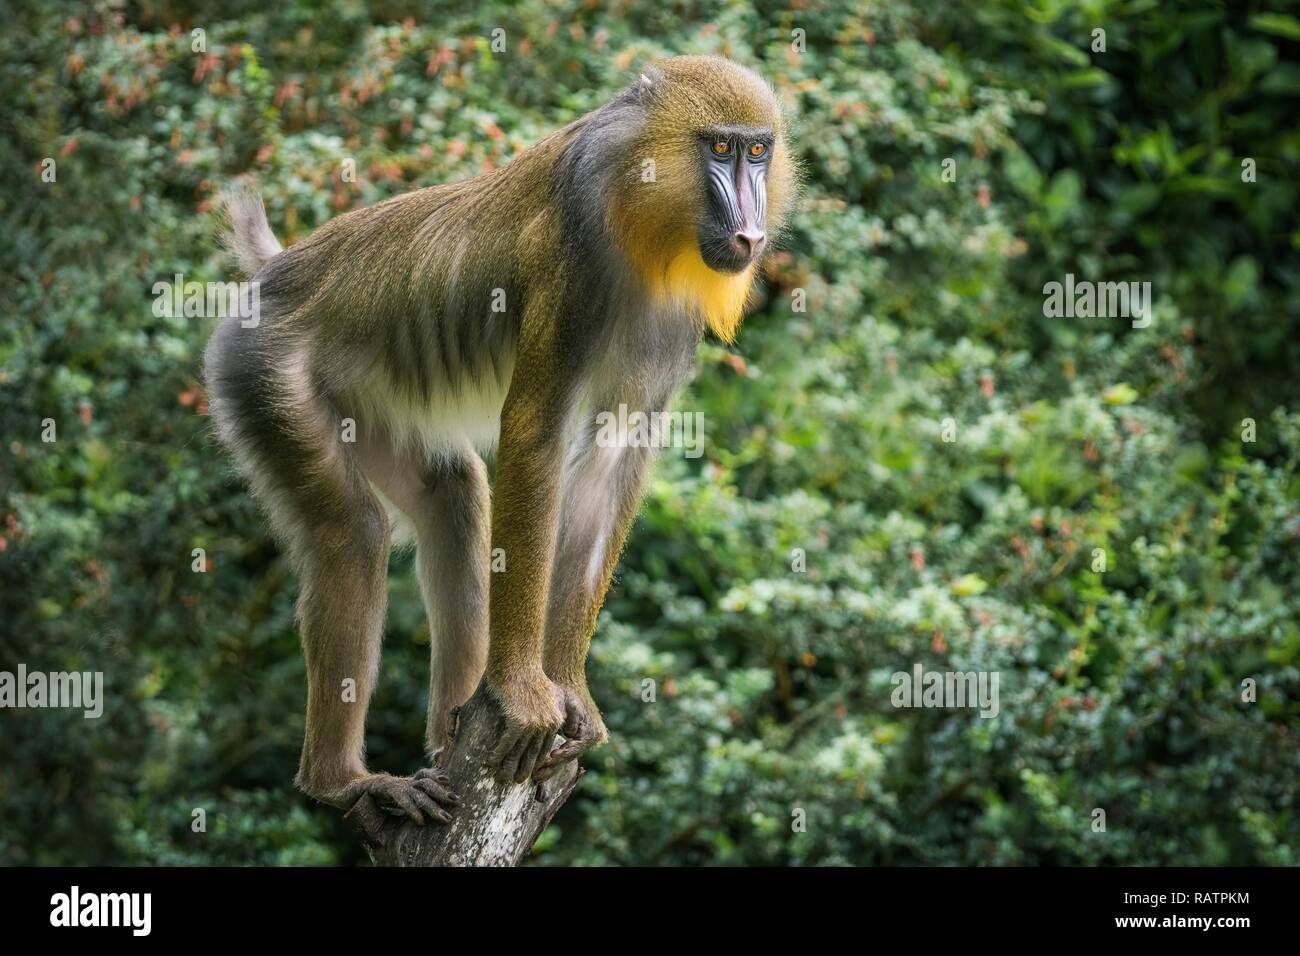 A close up photo of a Mandrill Stock Photo